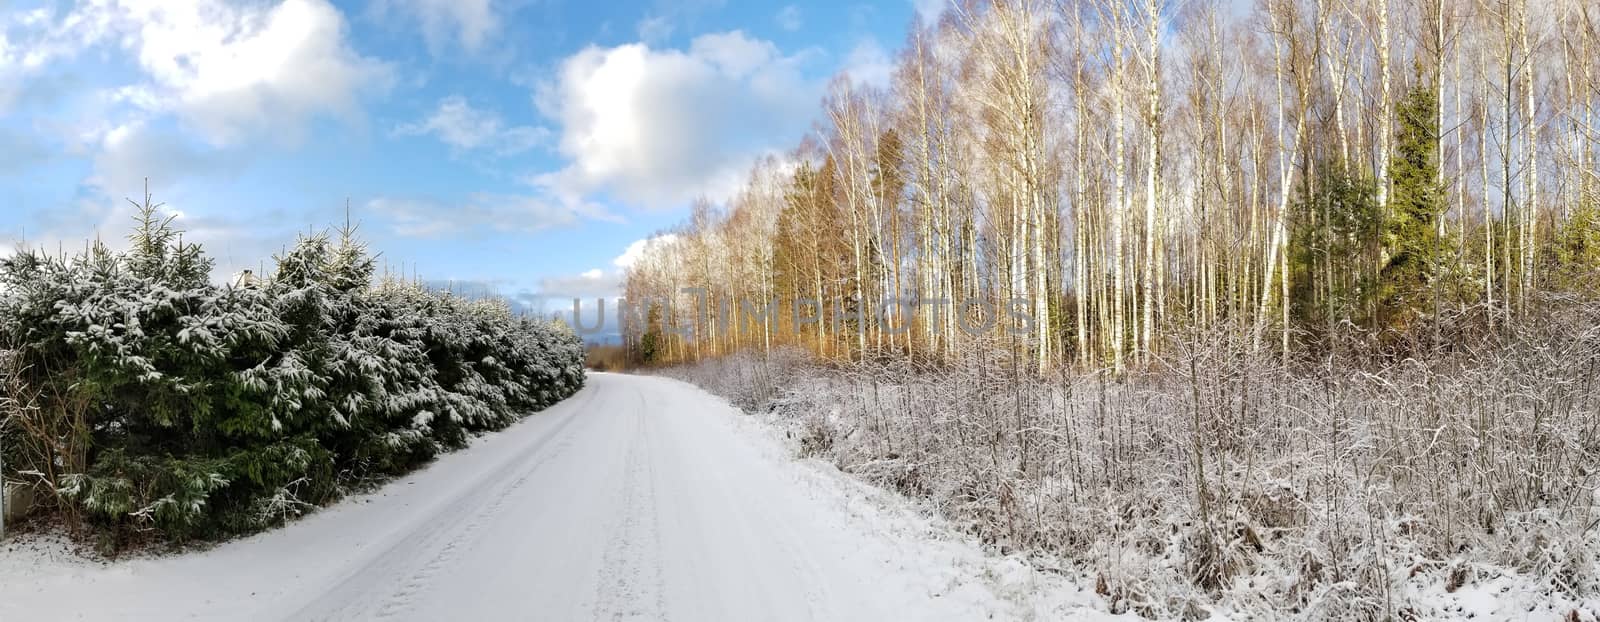 View of a road covered with snow and winter birch and spruce forest against a blue sky. Panoramic photo. by zakob337